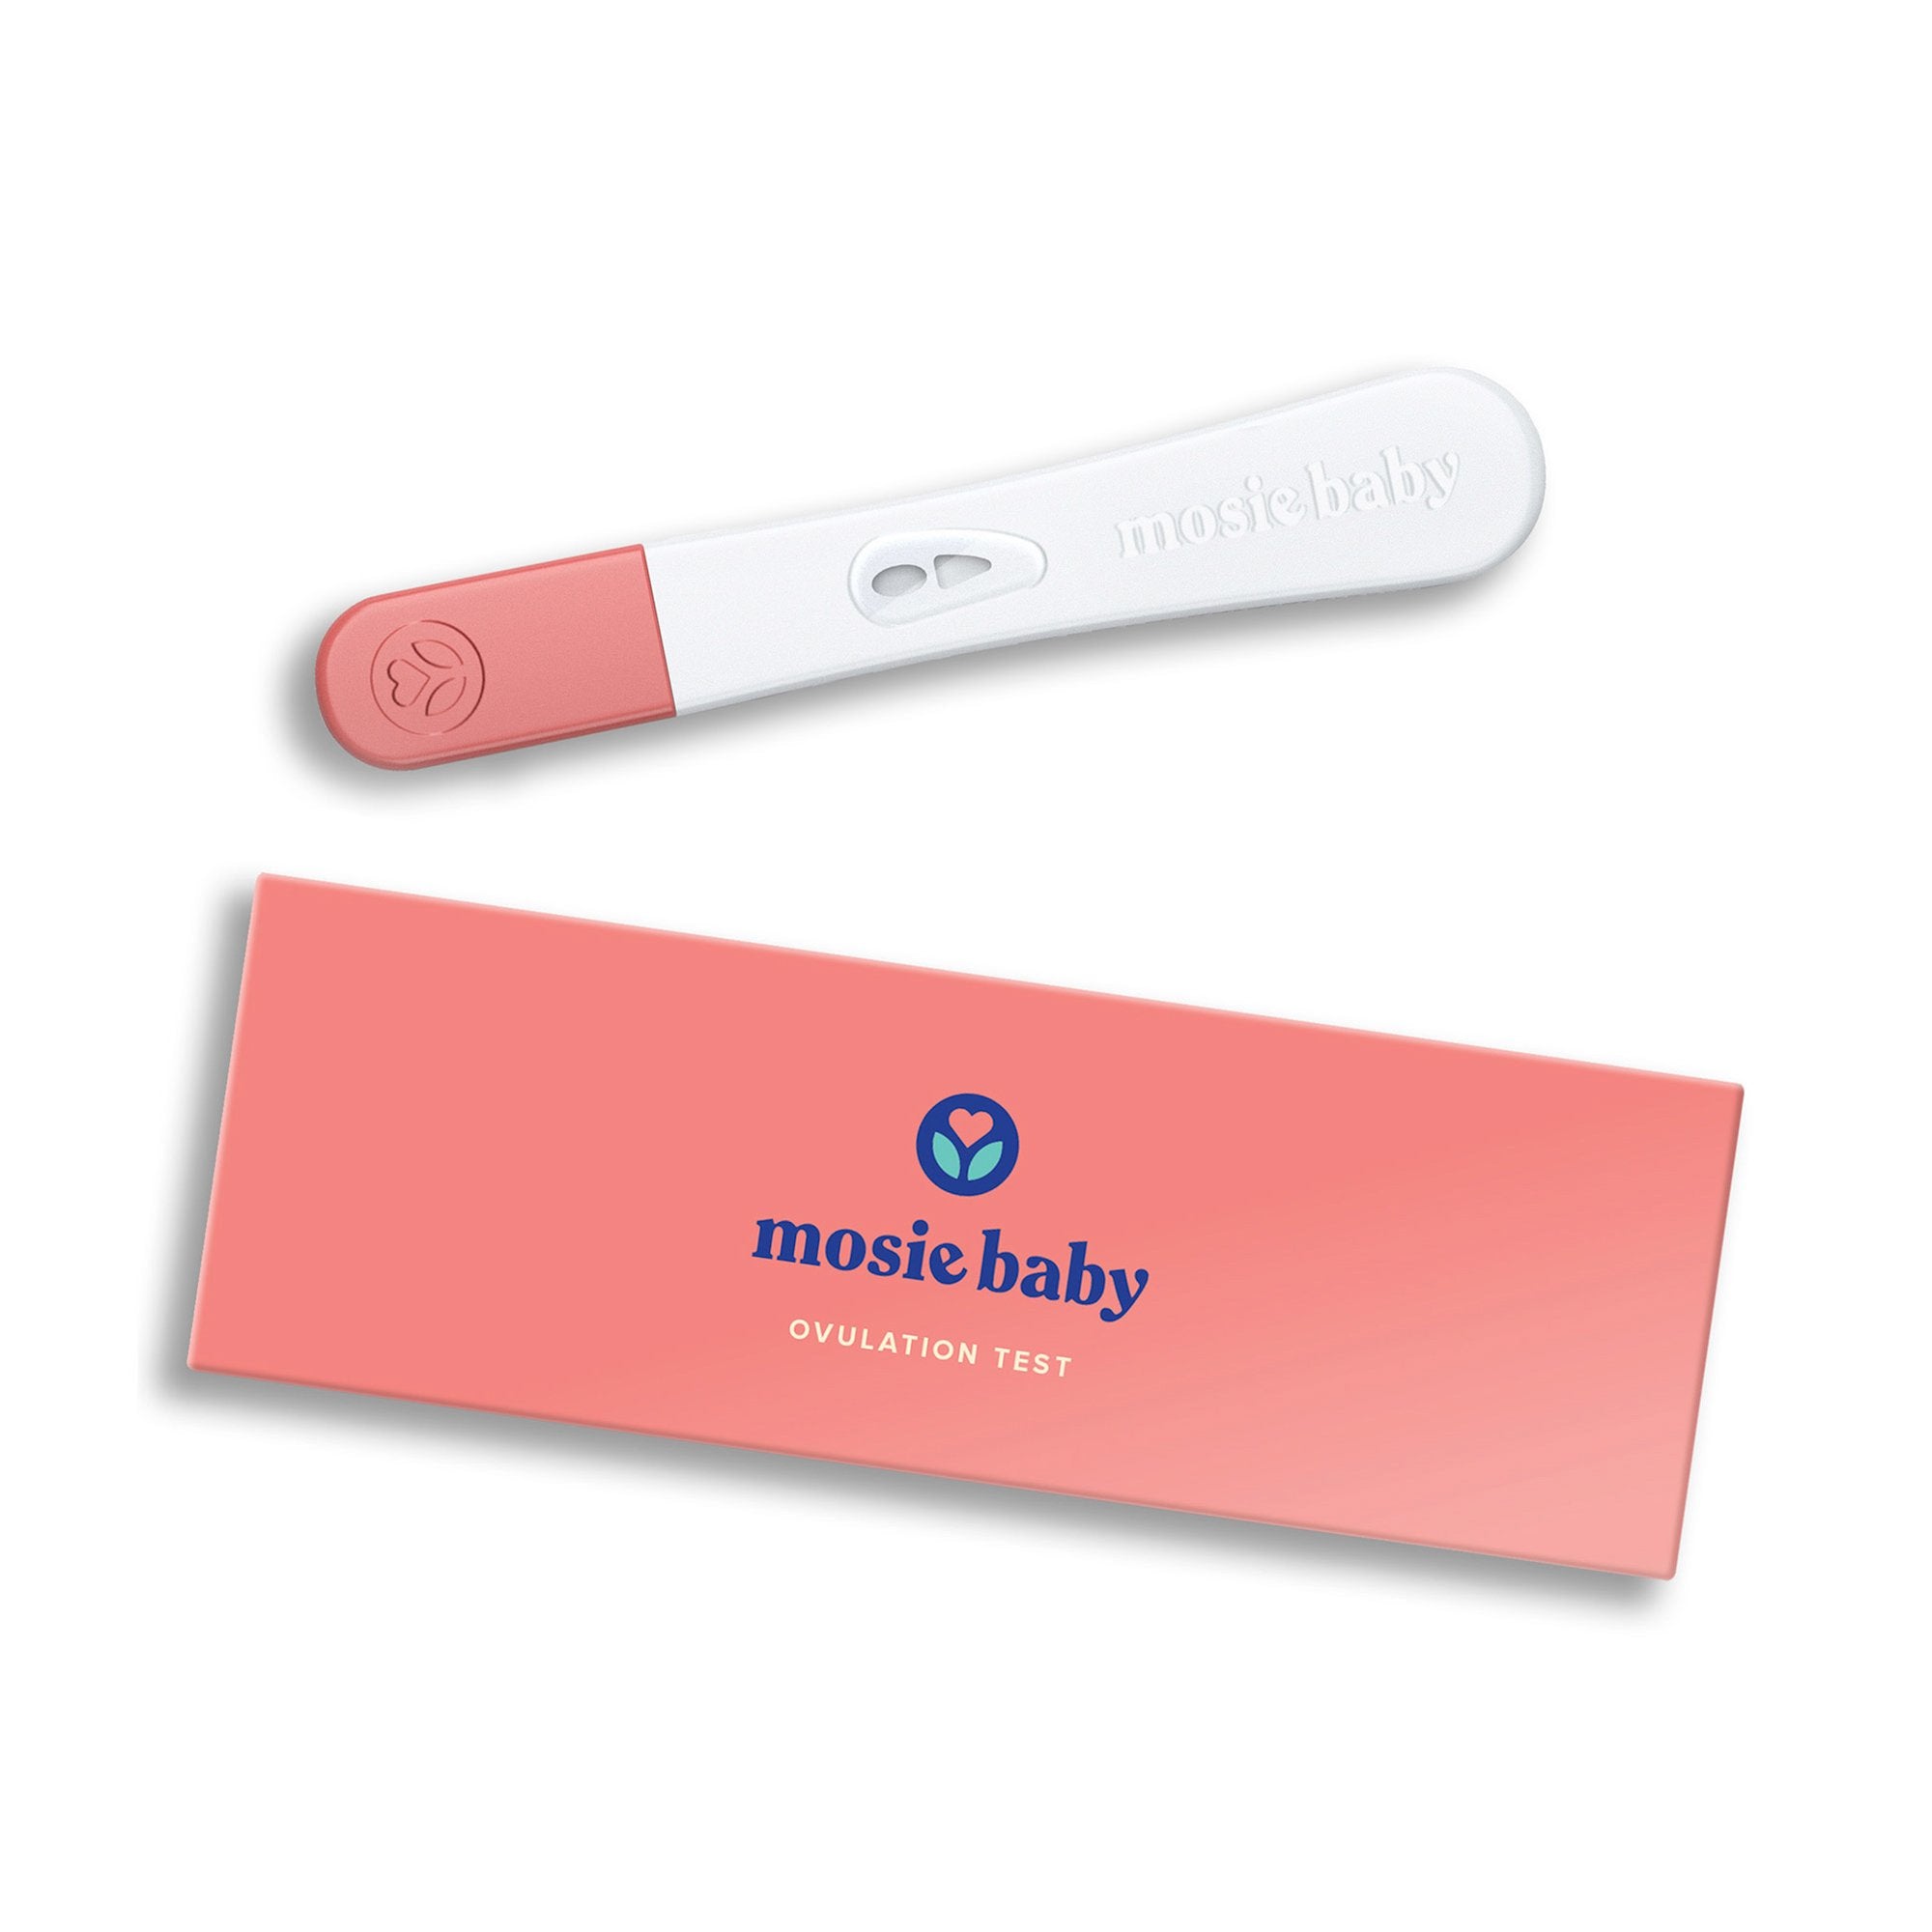 Reproductive Health Test Kit Mosie Baby LH Ovulation Predictor 7 Tests Non-Regulated (1 Unit)